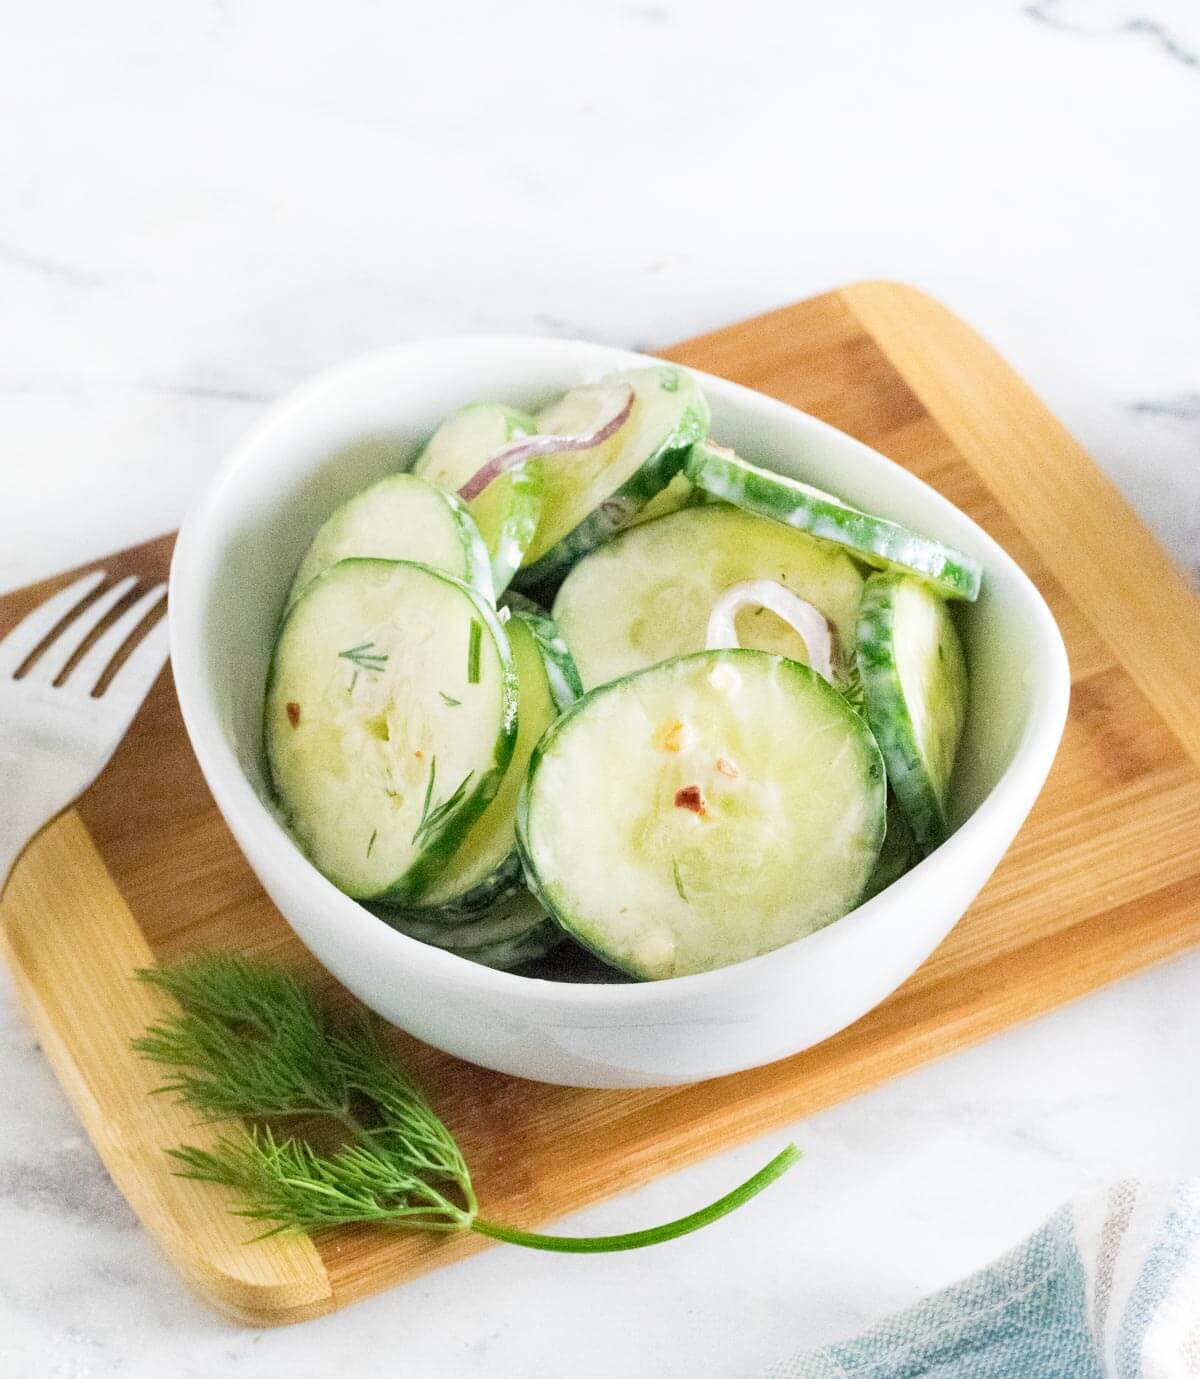 Spicy cucumber salad served in bowl.